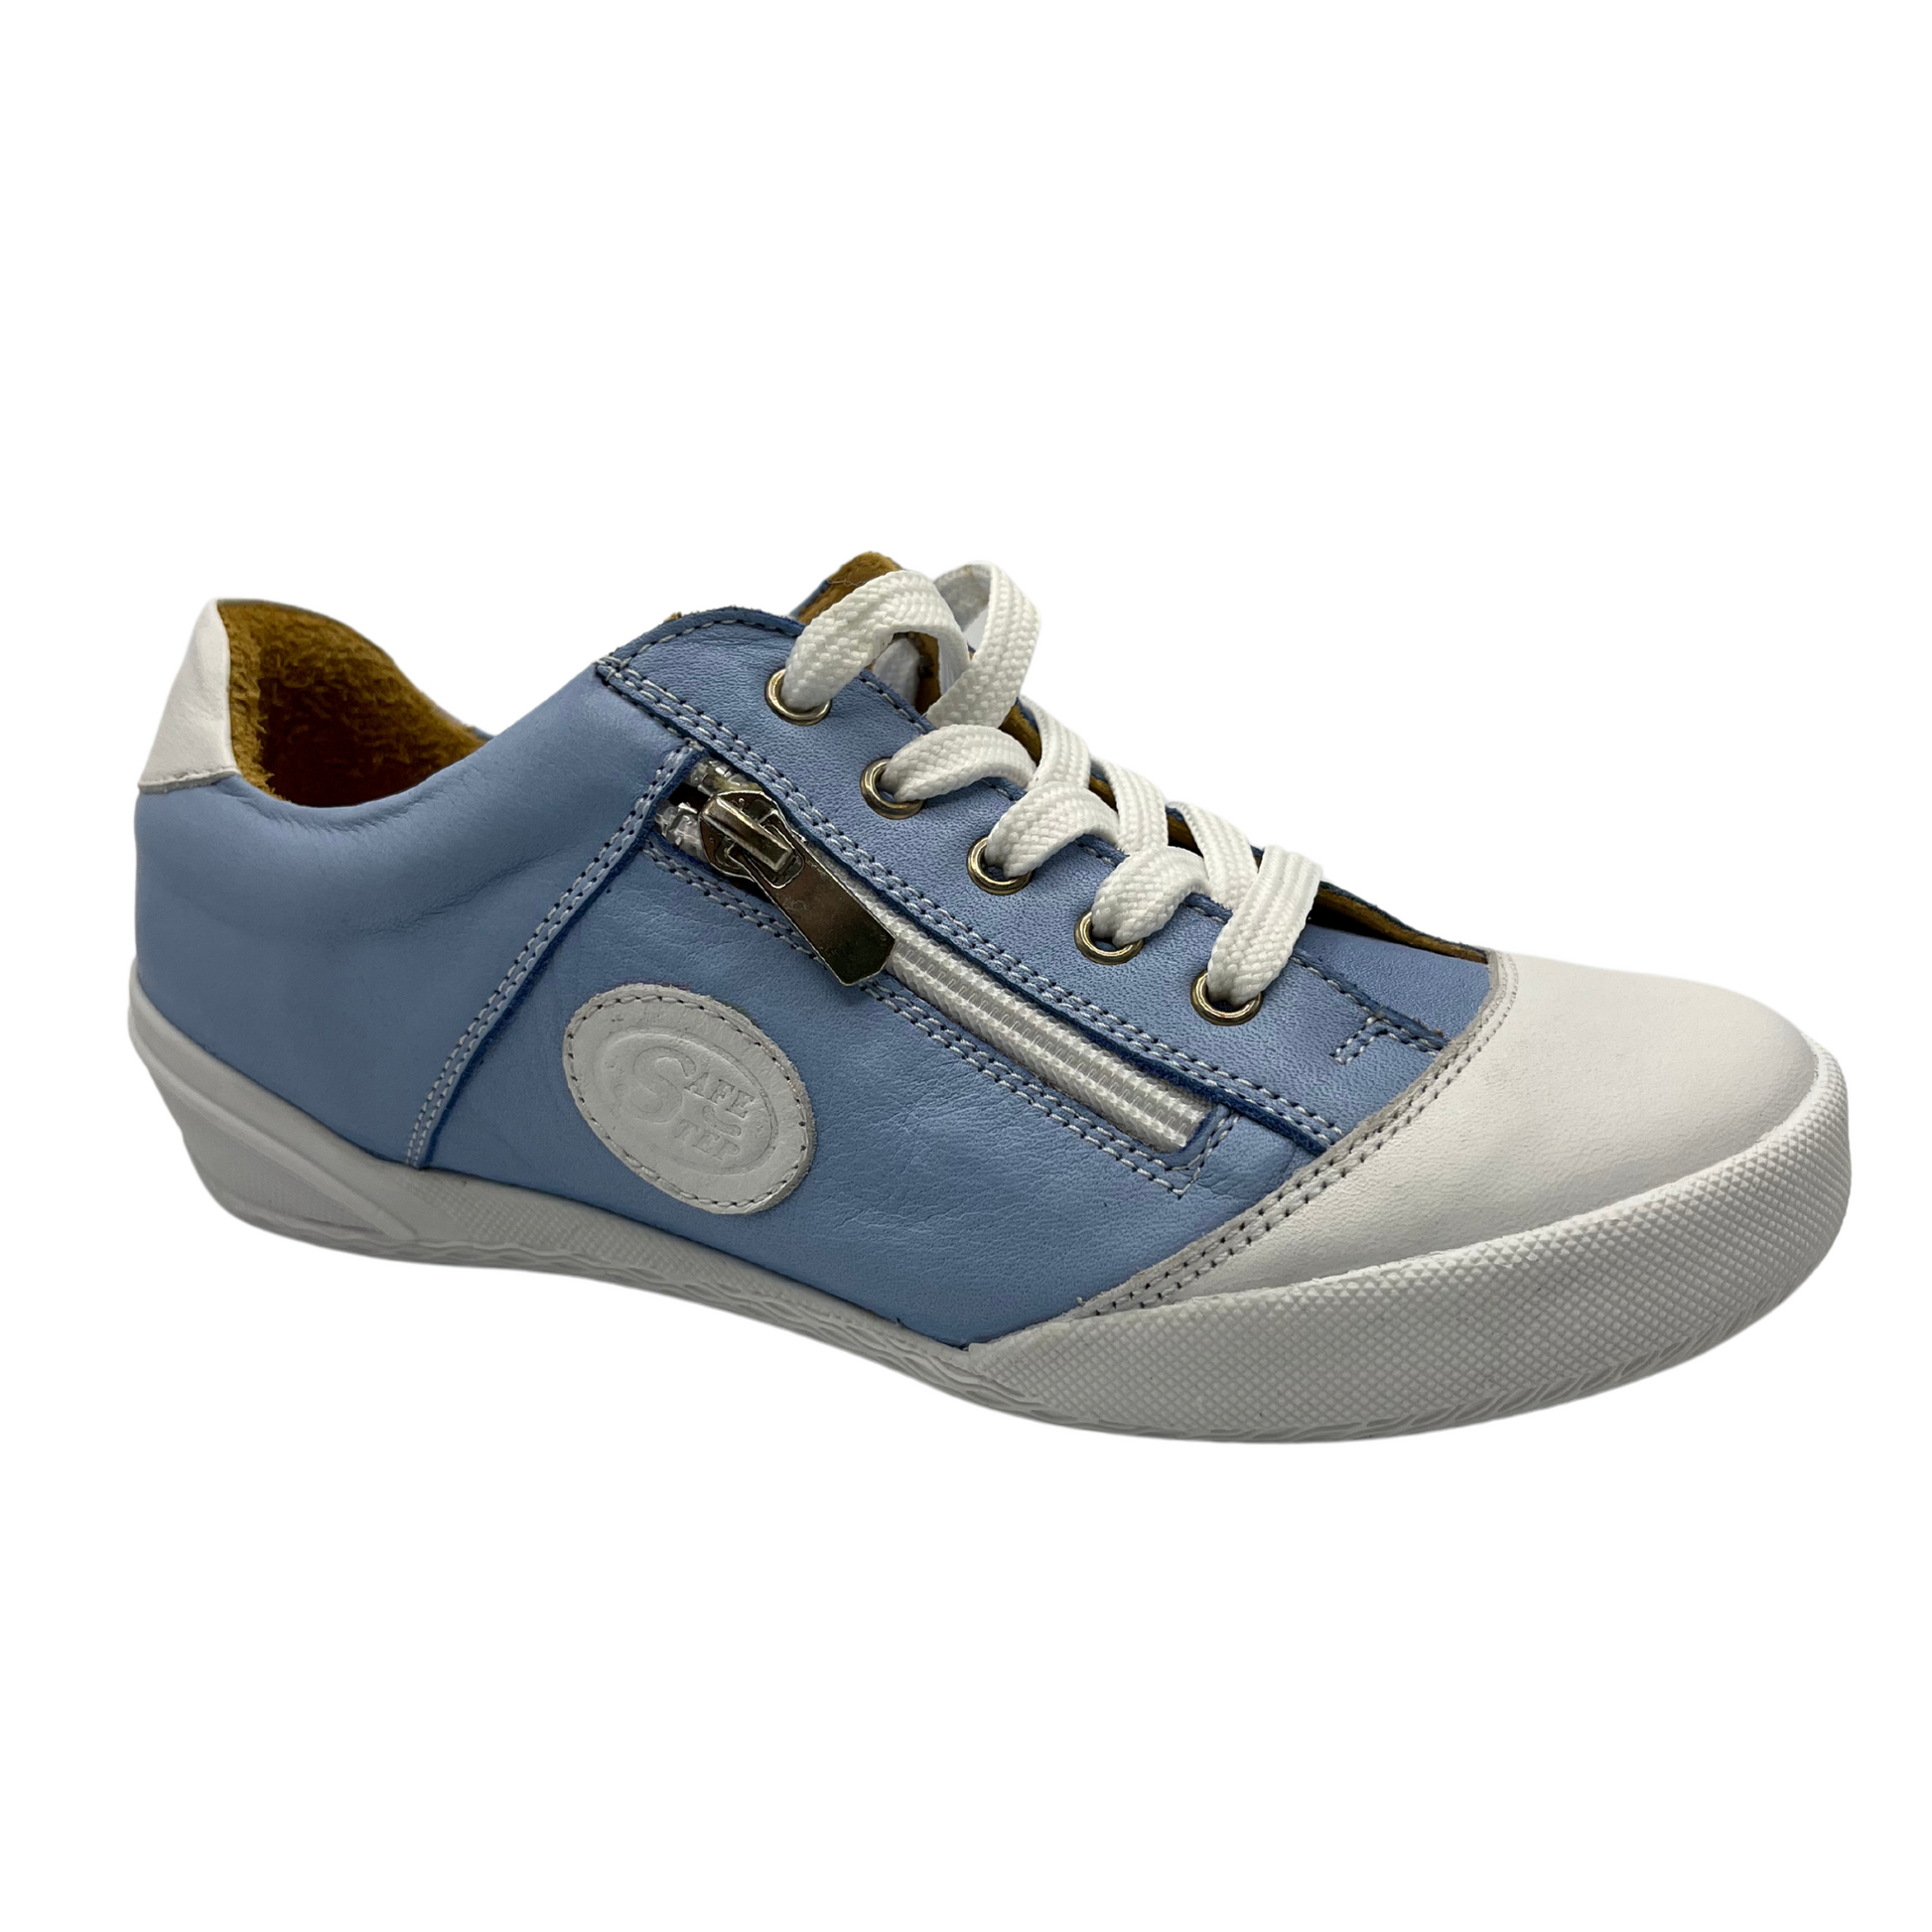 45 degree angled view of blue and white leather sneaker. It has tan leather lining and side zipper along laces. White rubber outsole and white leather toe cap.